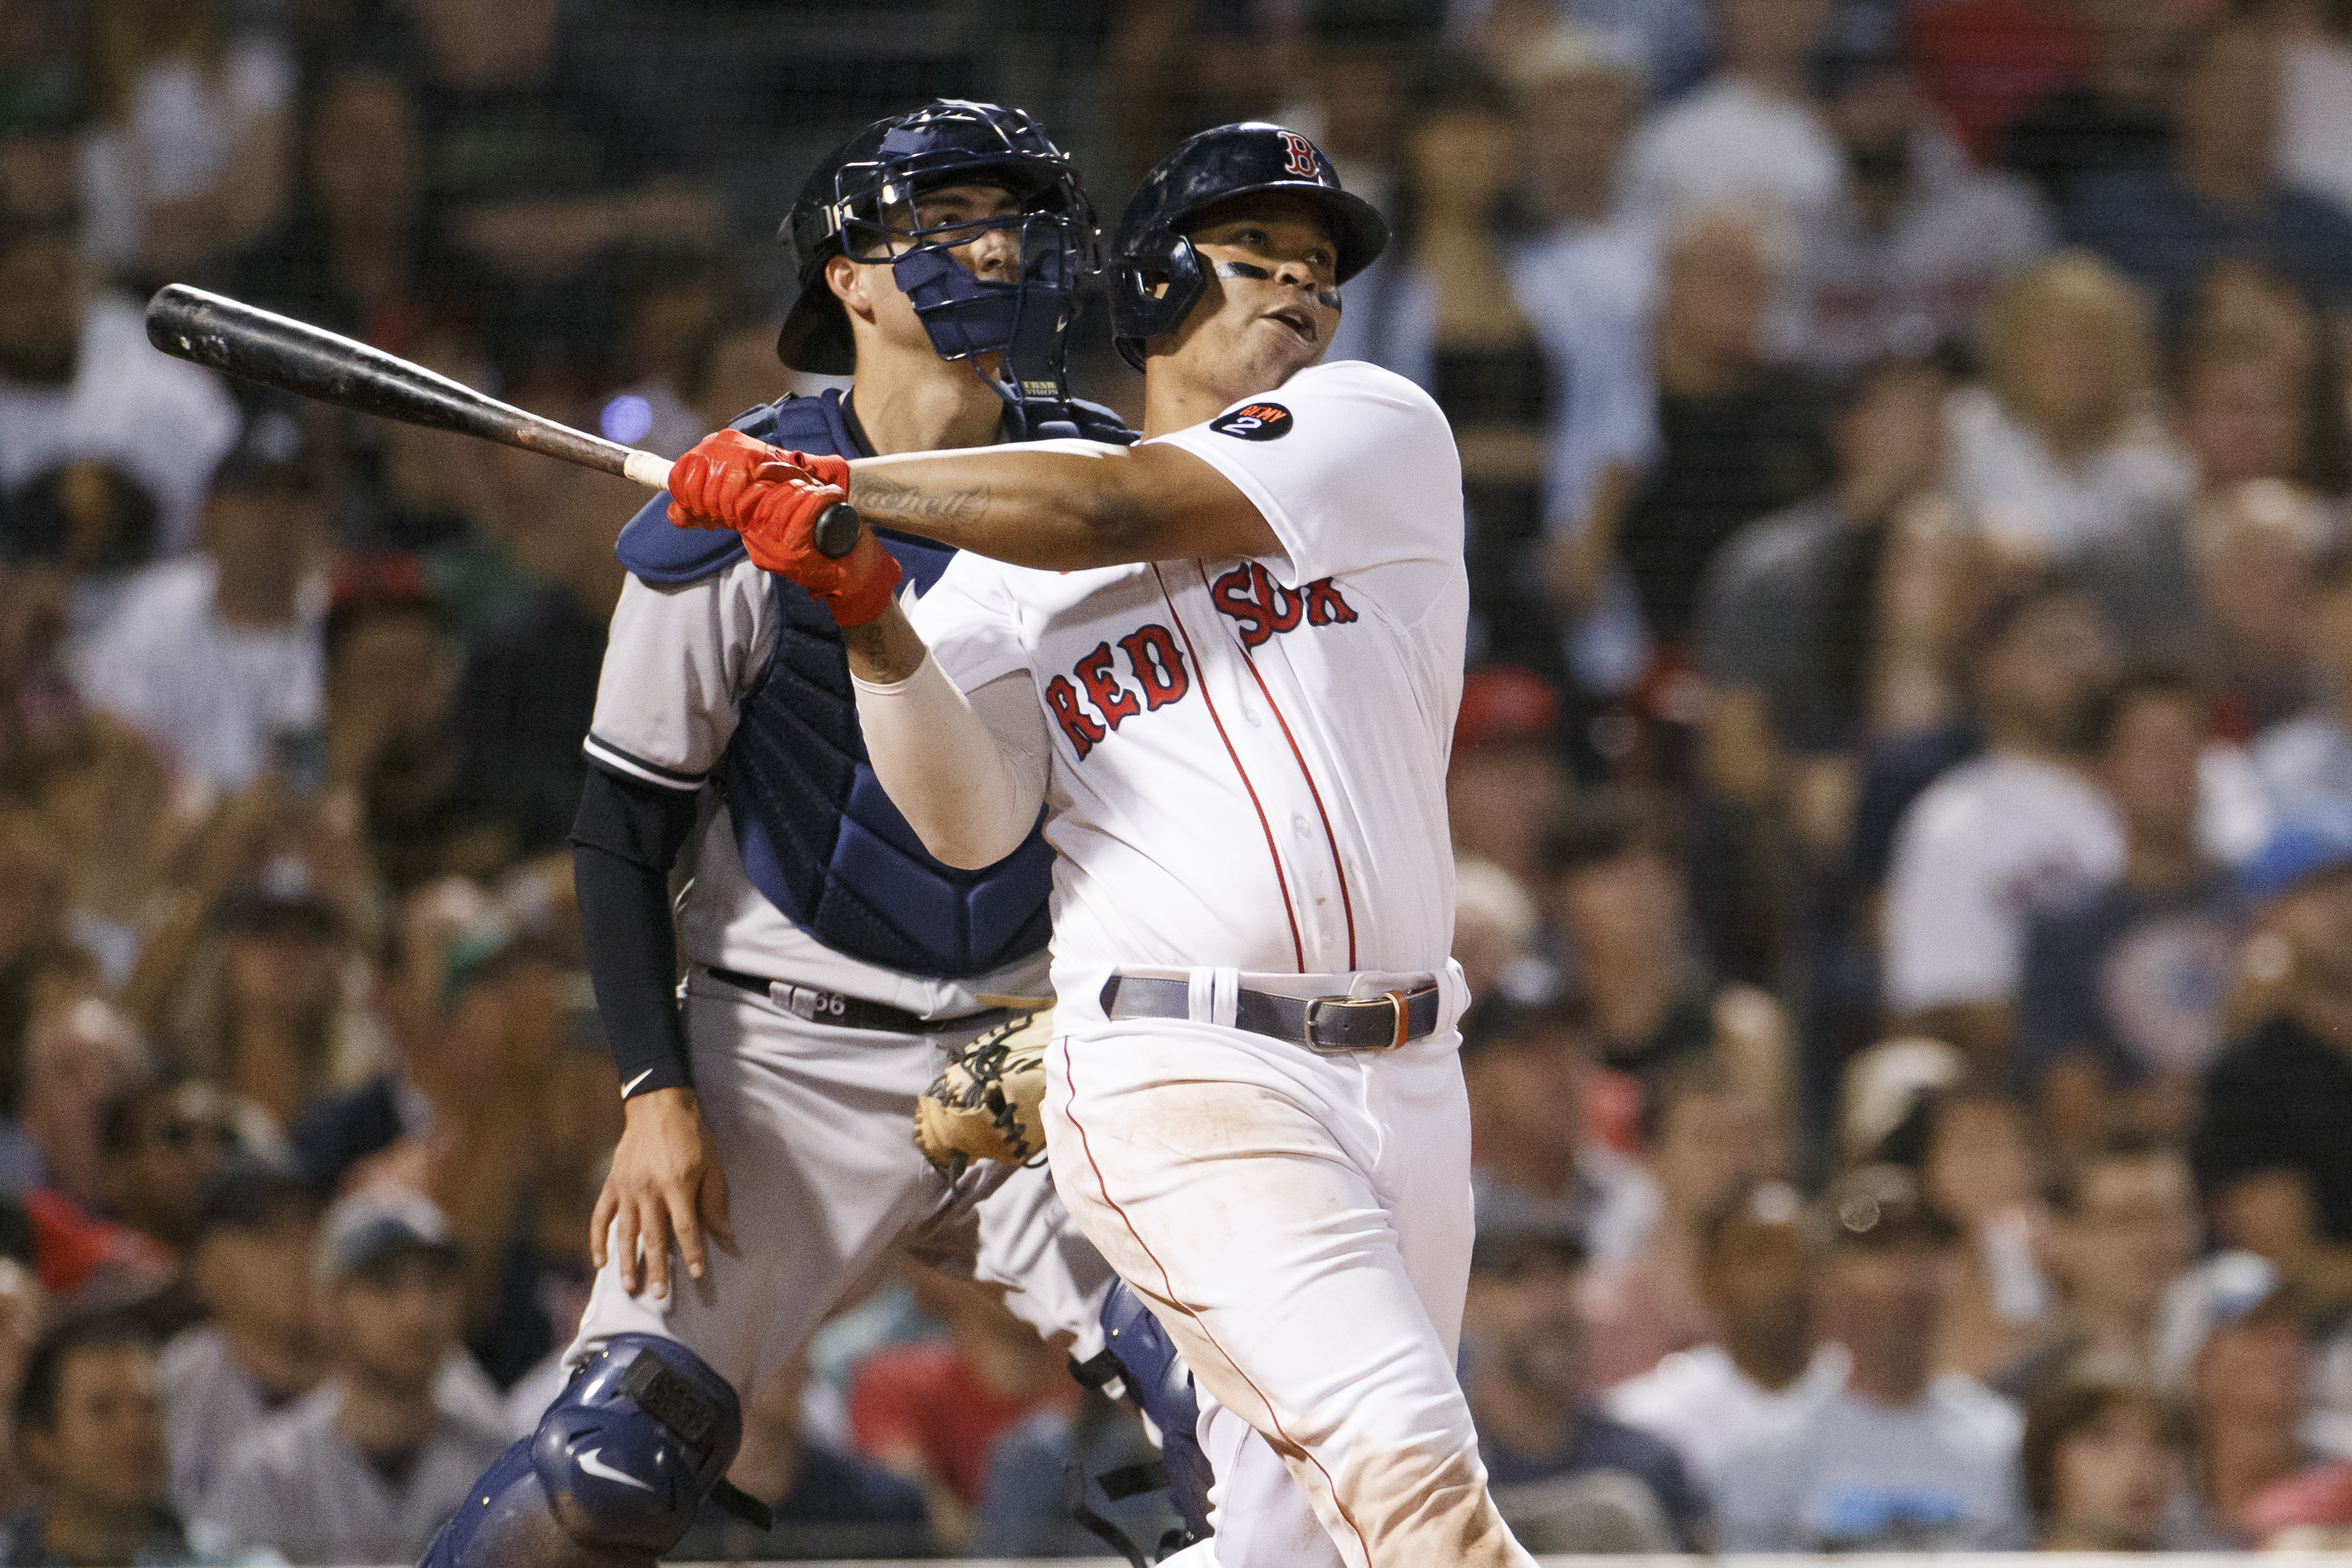 Devers' two dingers lift Red Sox, The Westfield News